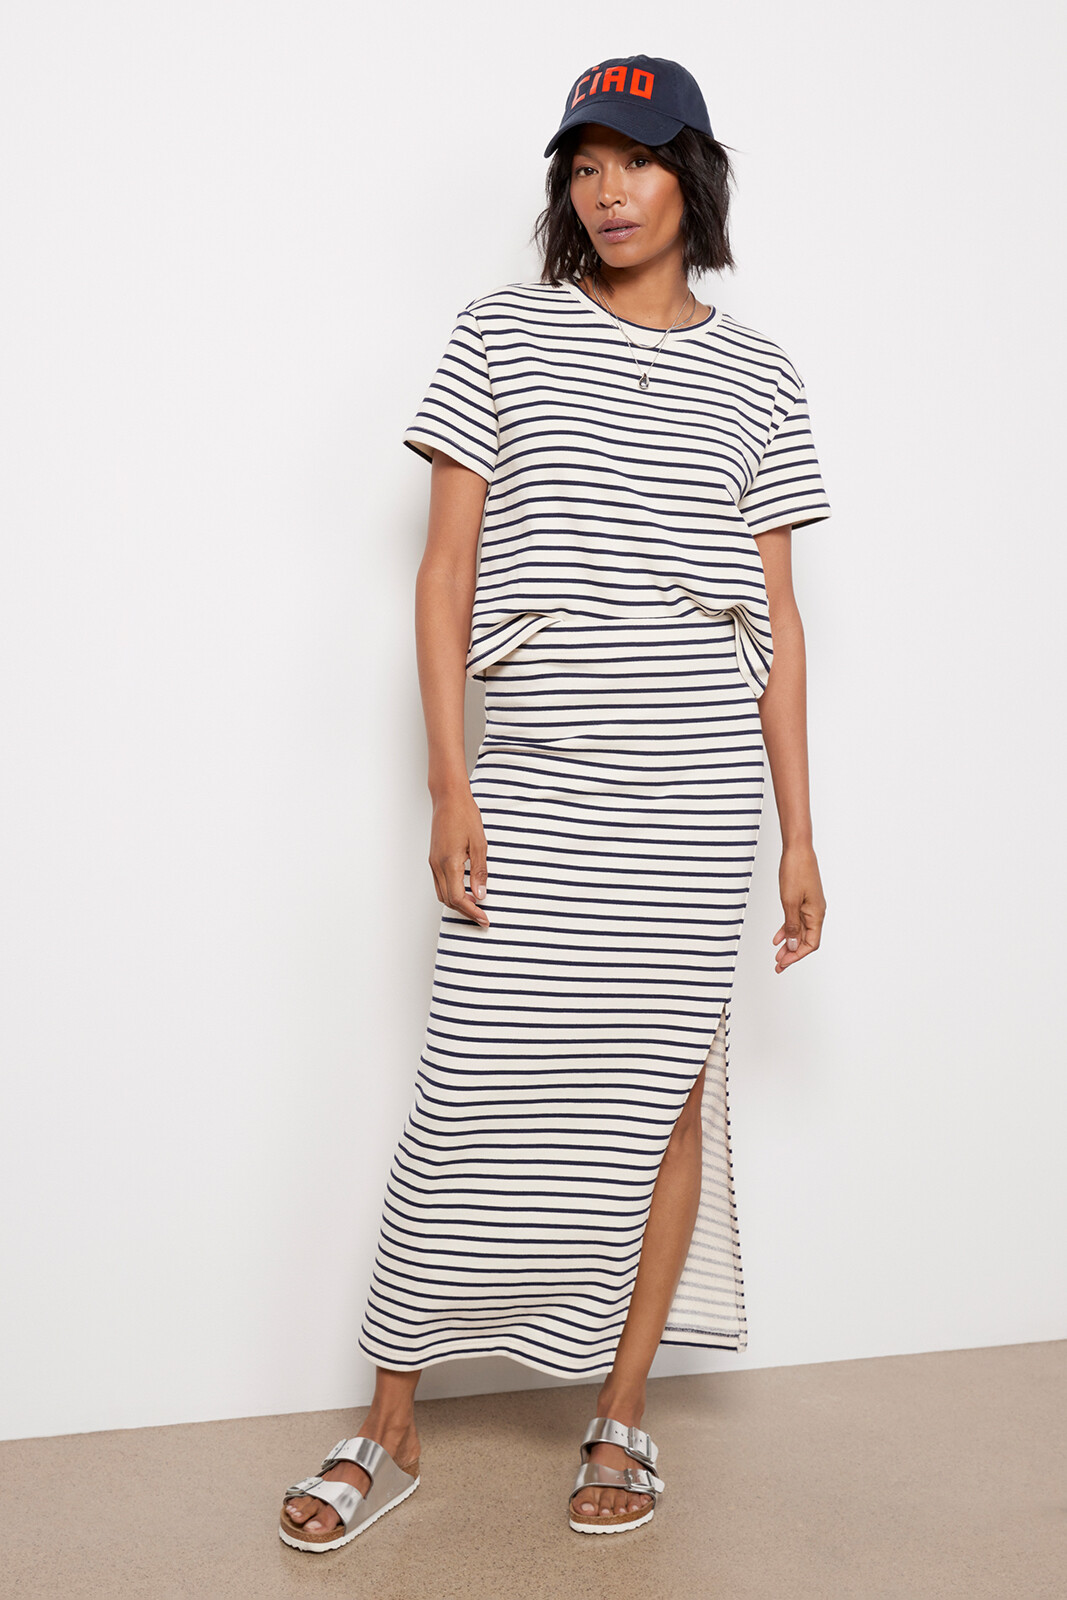 Travel Must Have - Striped Skirt | Wear this w/ matching tee or separate it